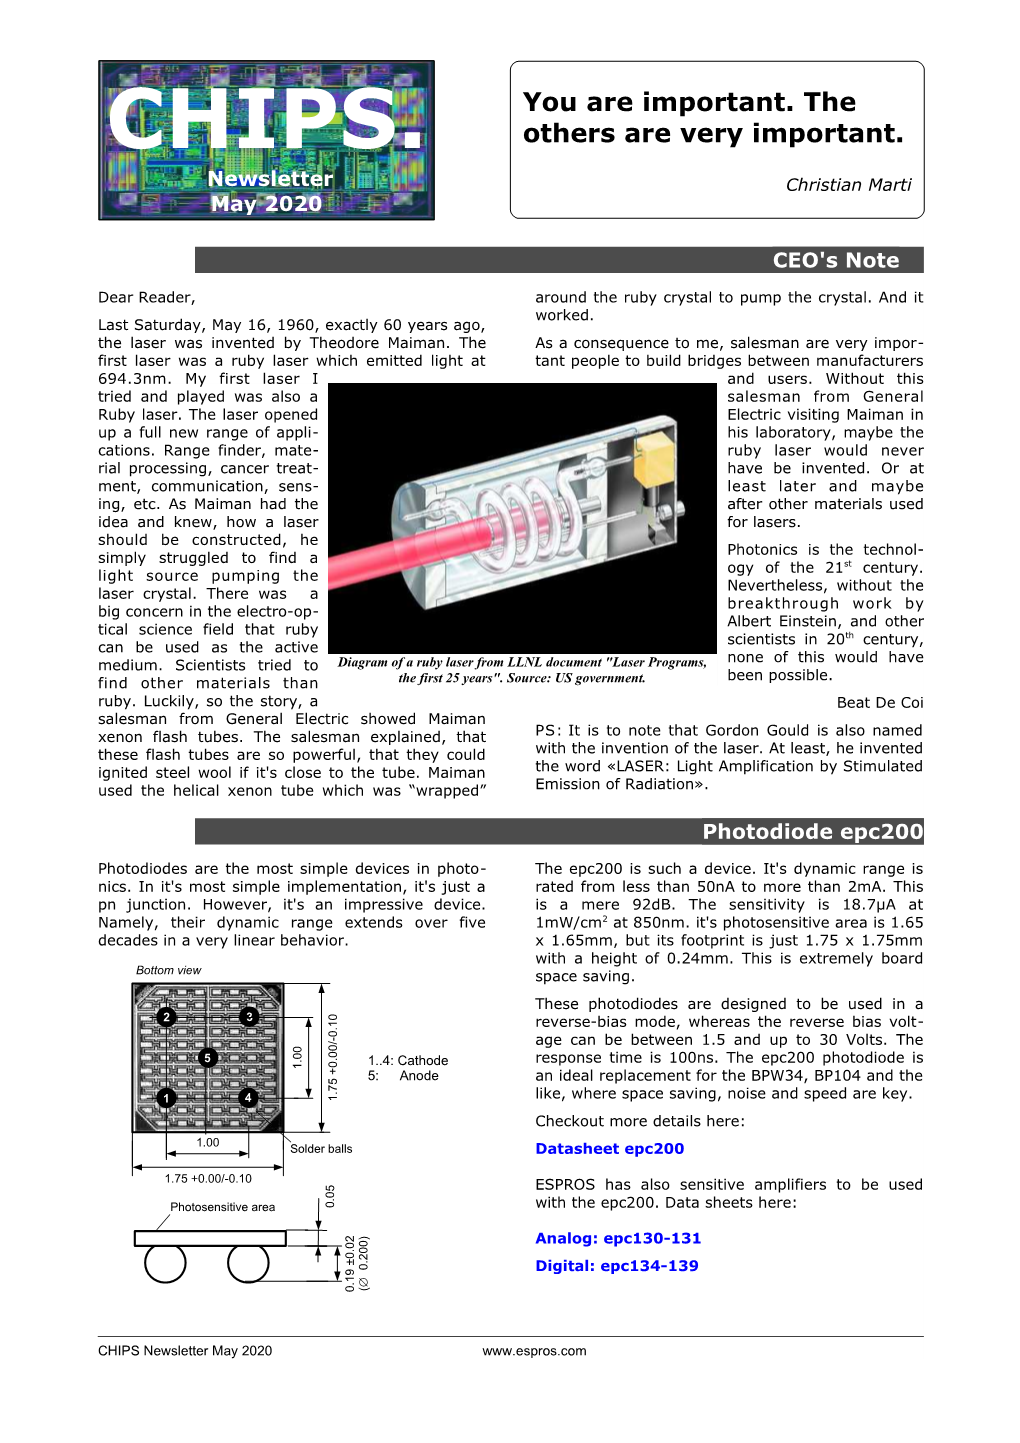 Chips Newsletter ©ESPROS Photonics Corp